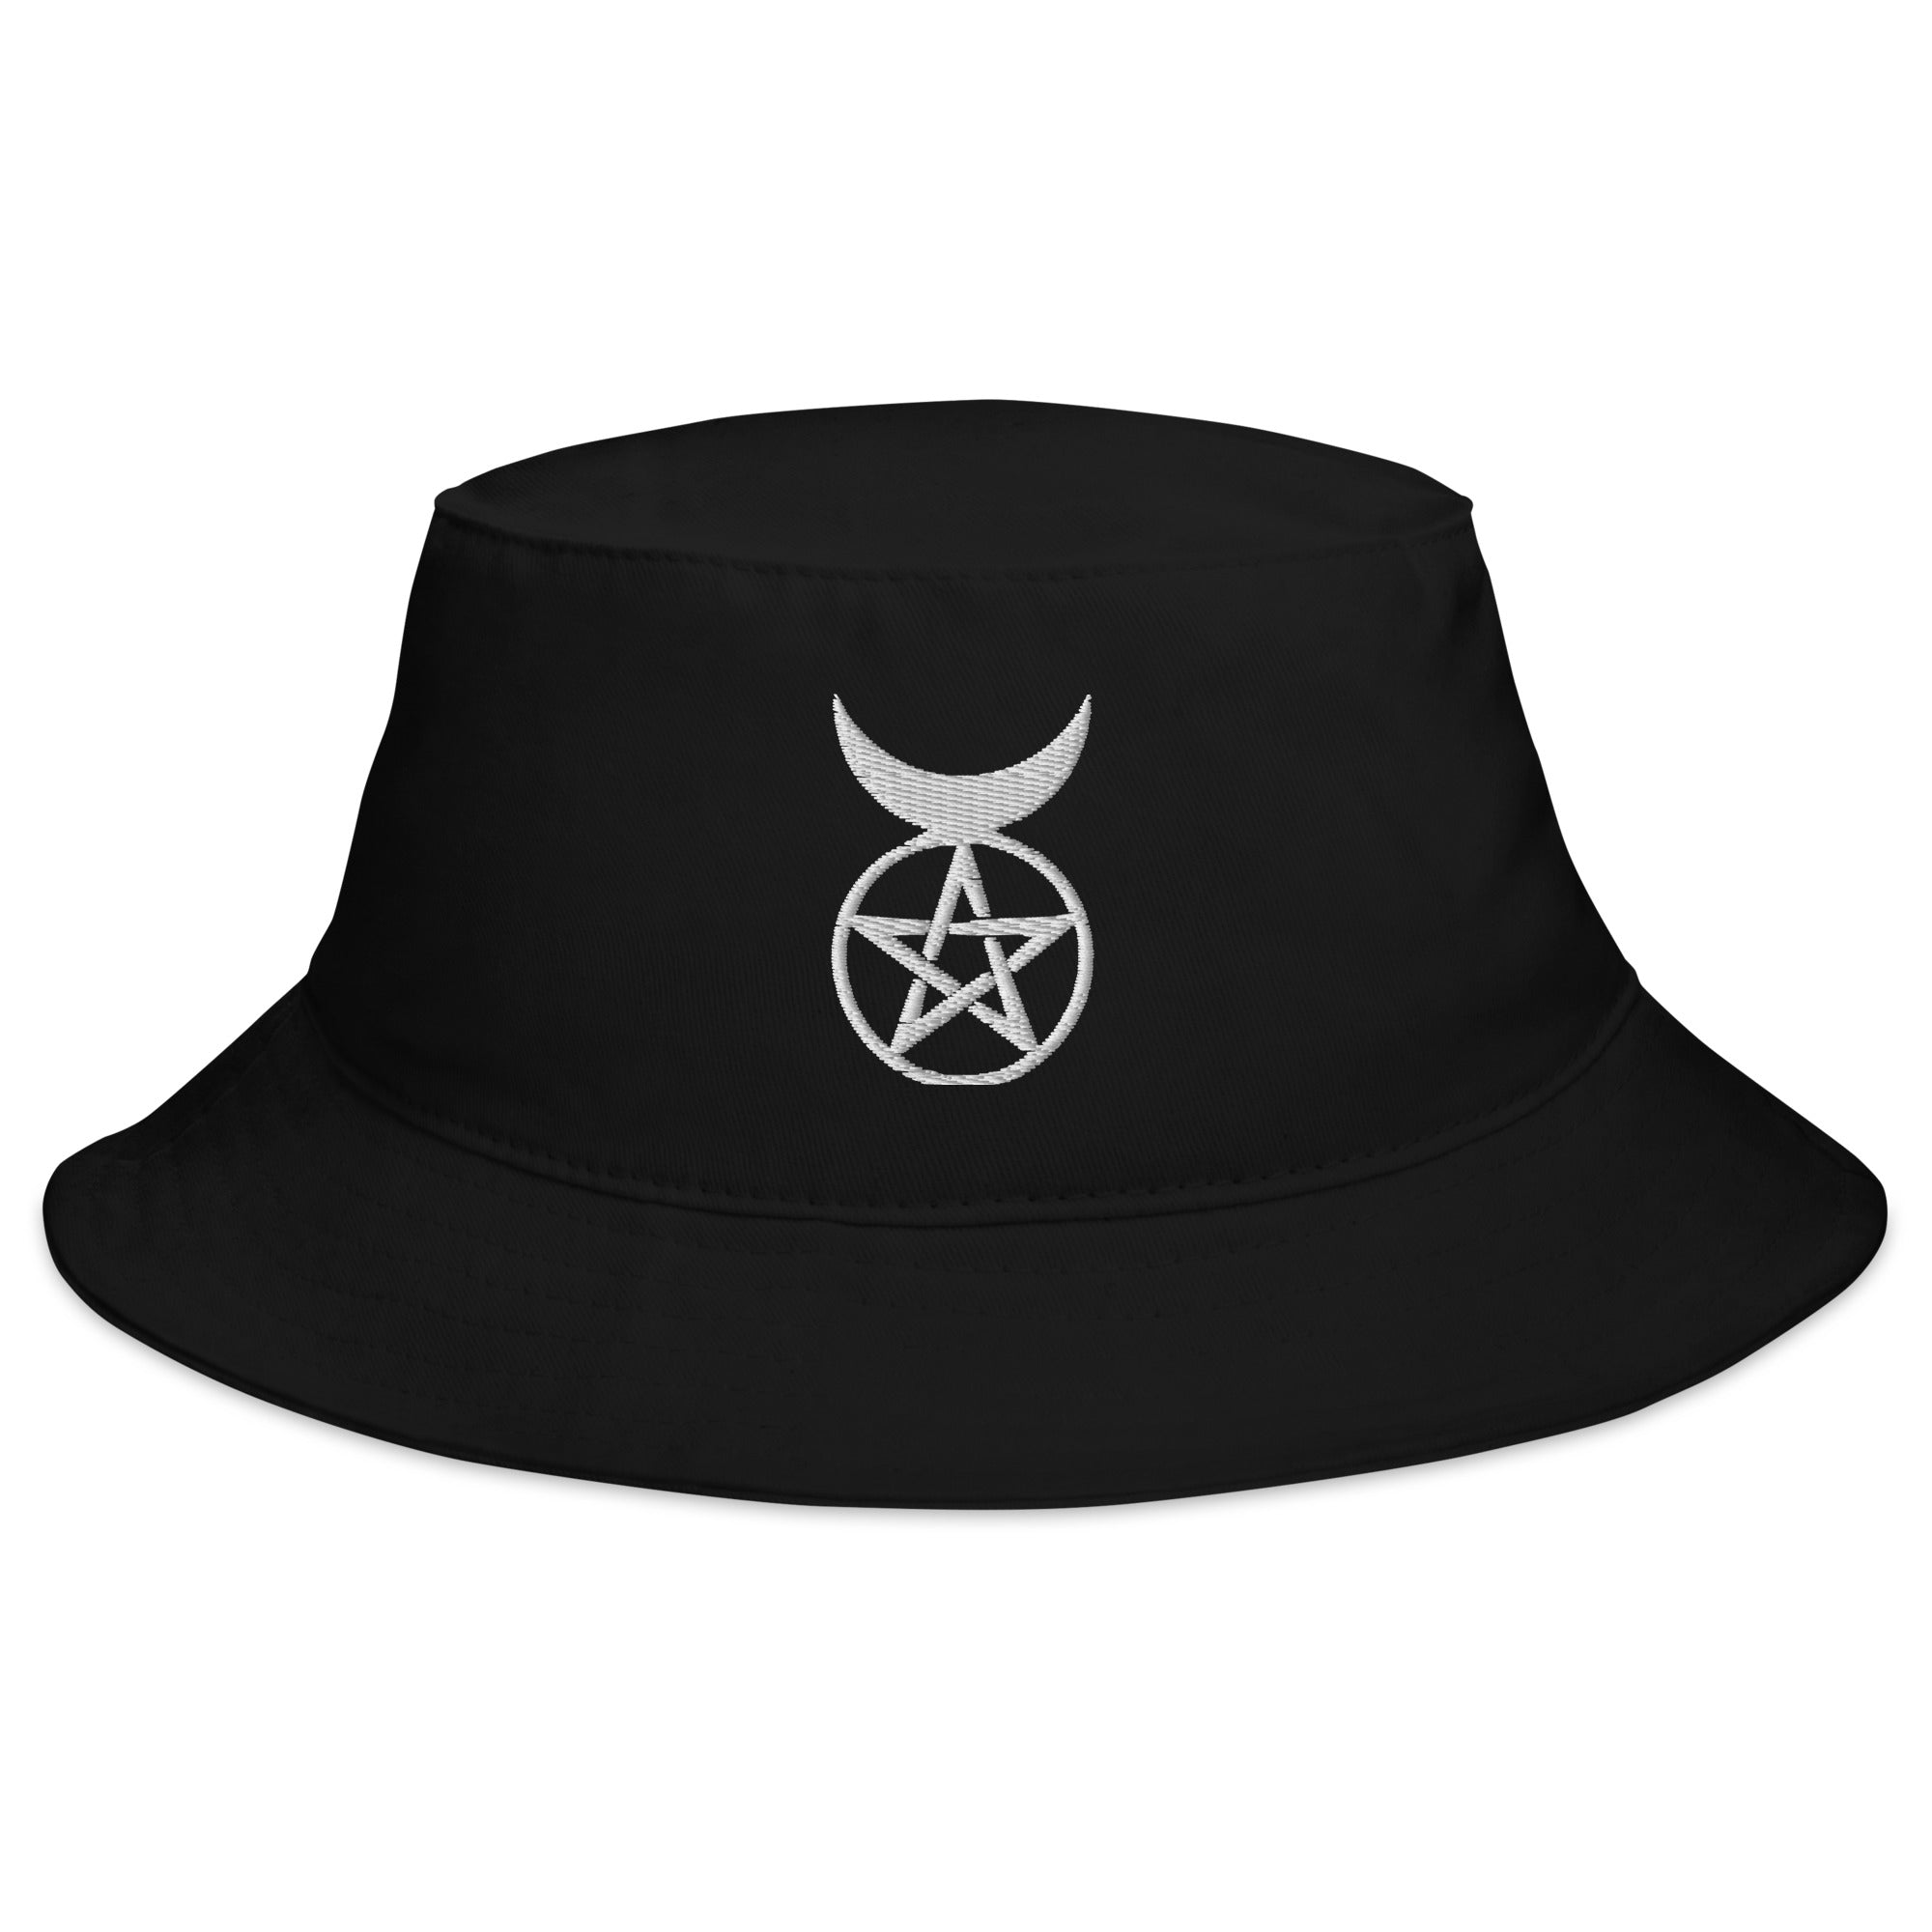 The Horned God Embroidered Bucket Hat Wicca Neopaganism Symbol